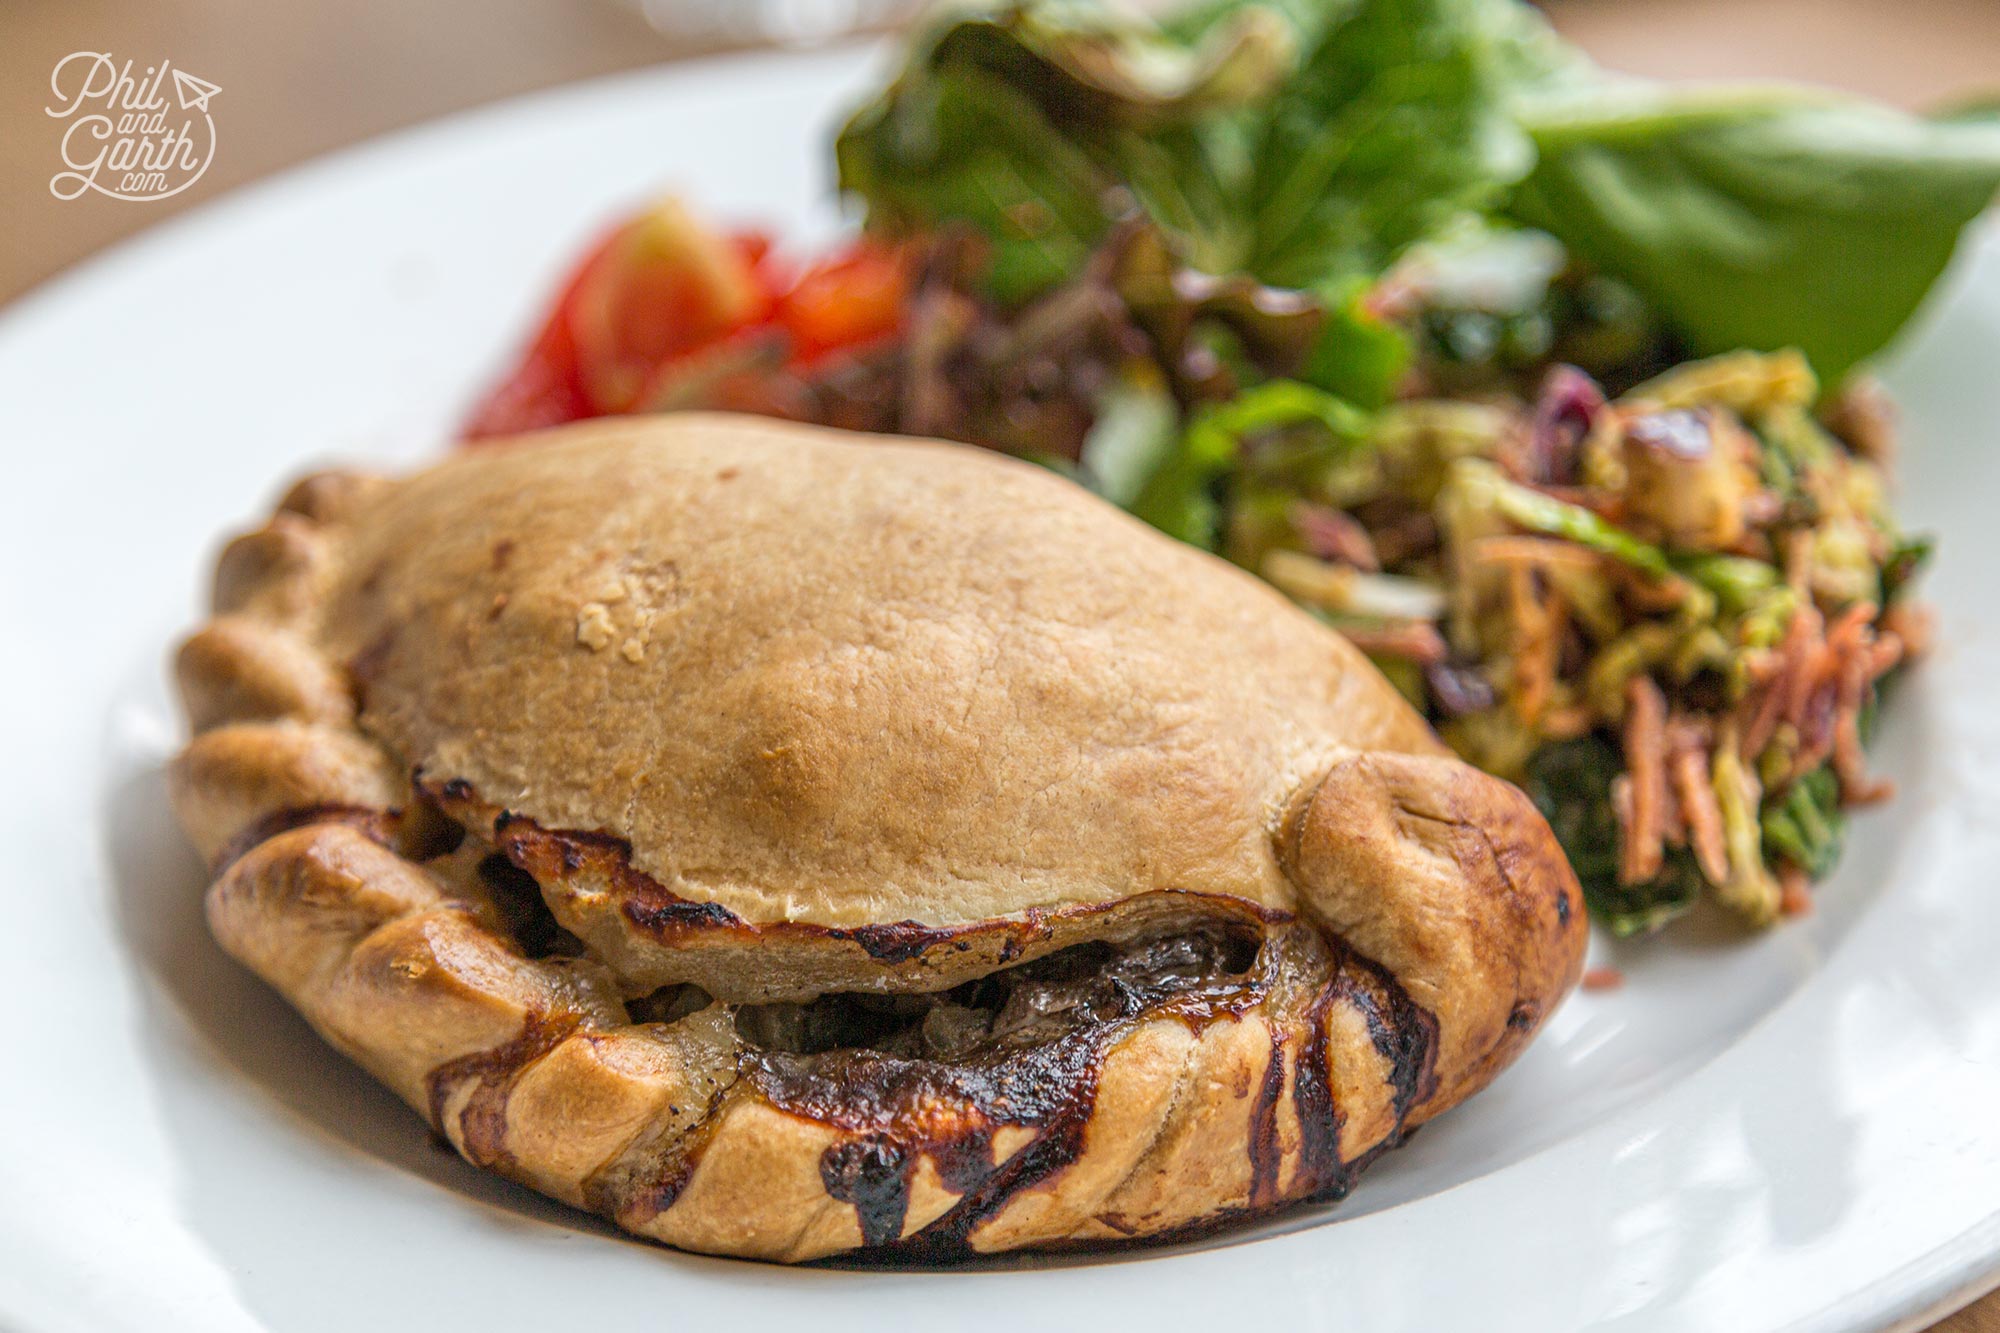 A delicious Cornish pastie from the Hole Foods Cafe in Mousehole